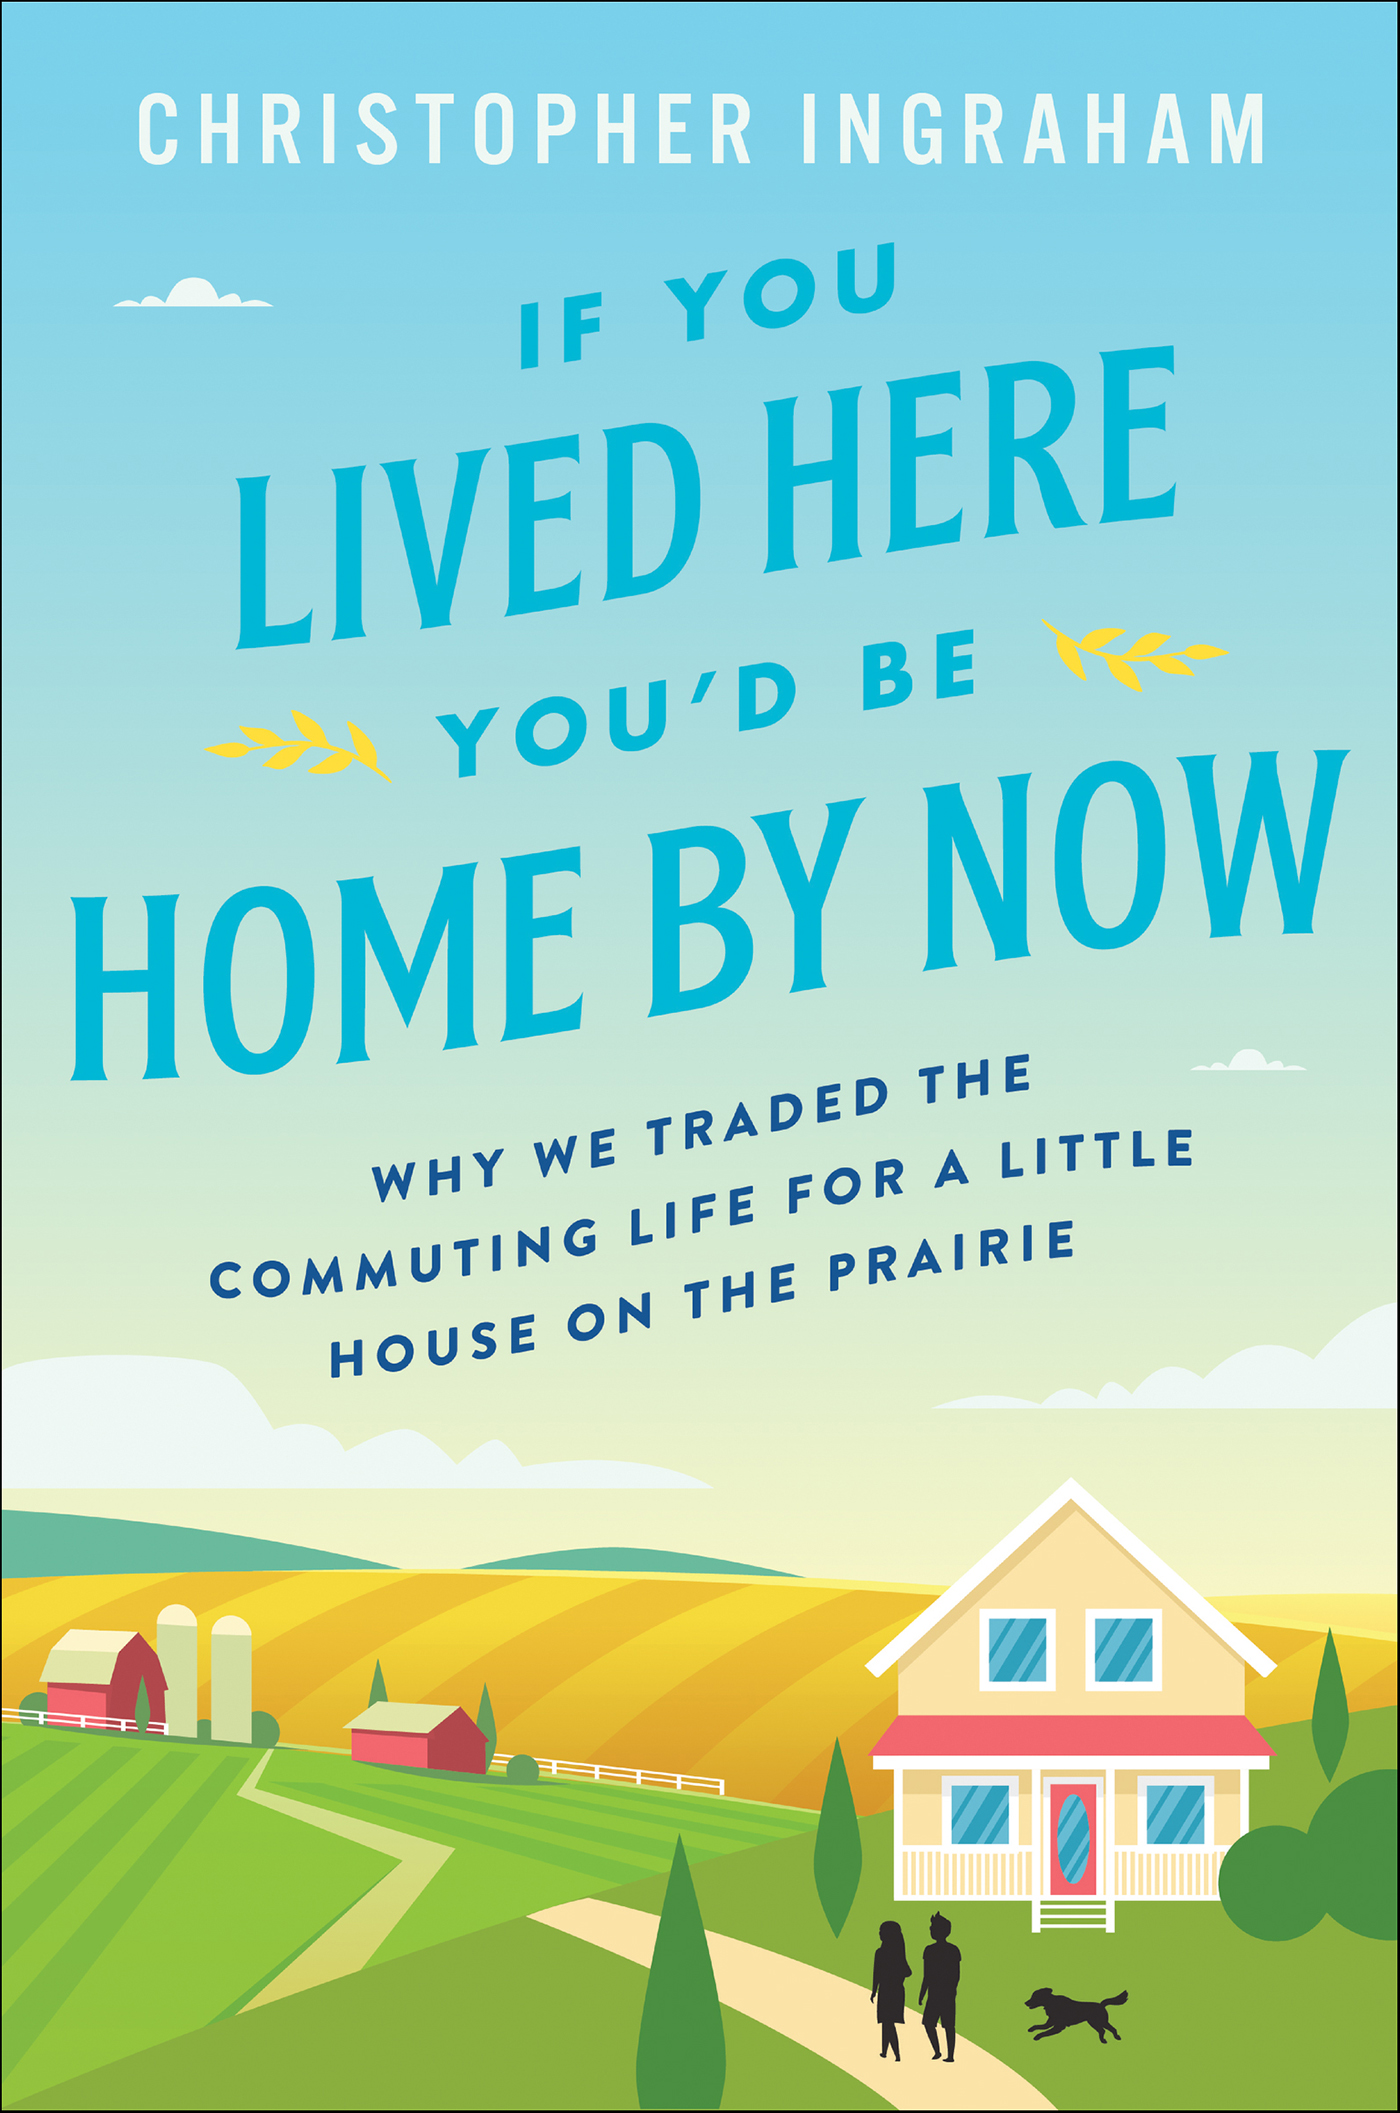 If you lived here you'd be home by now why we traded the commuting life for a little house on the prairie cover image